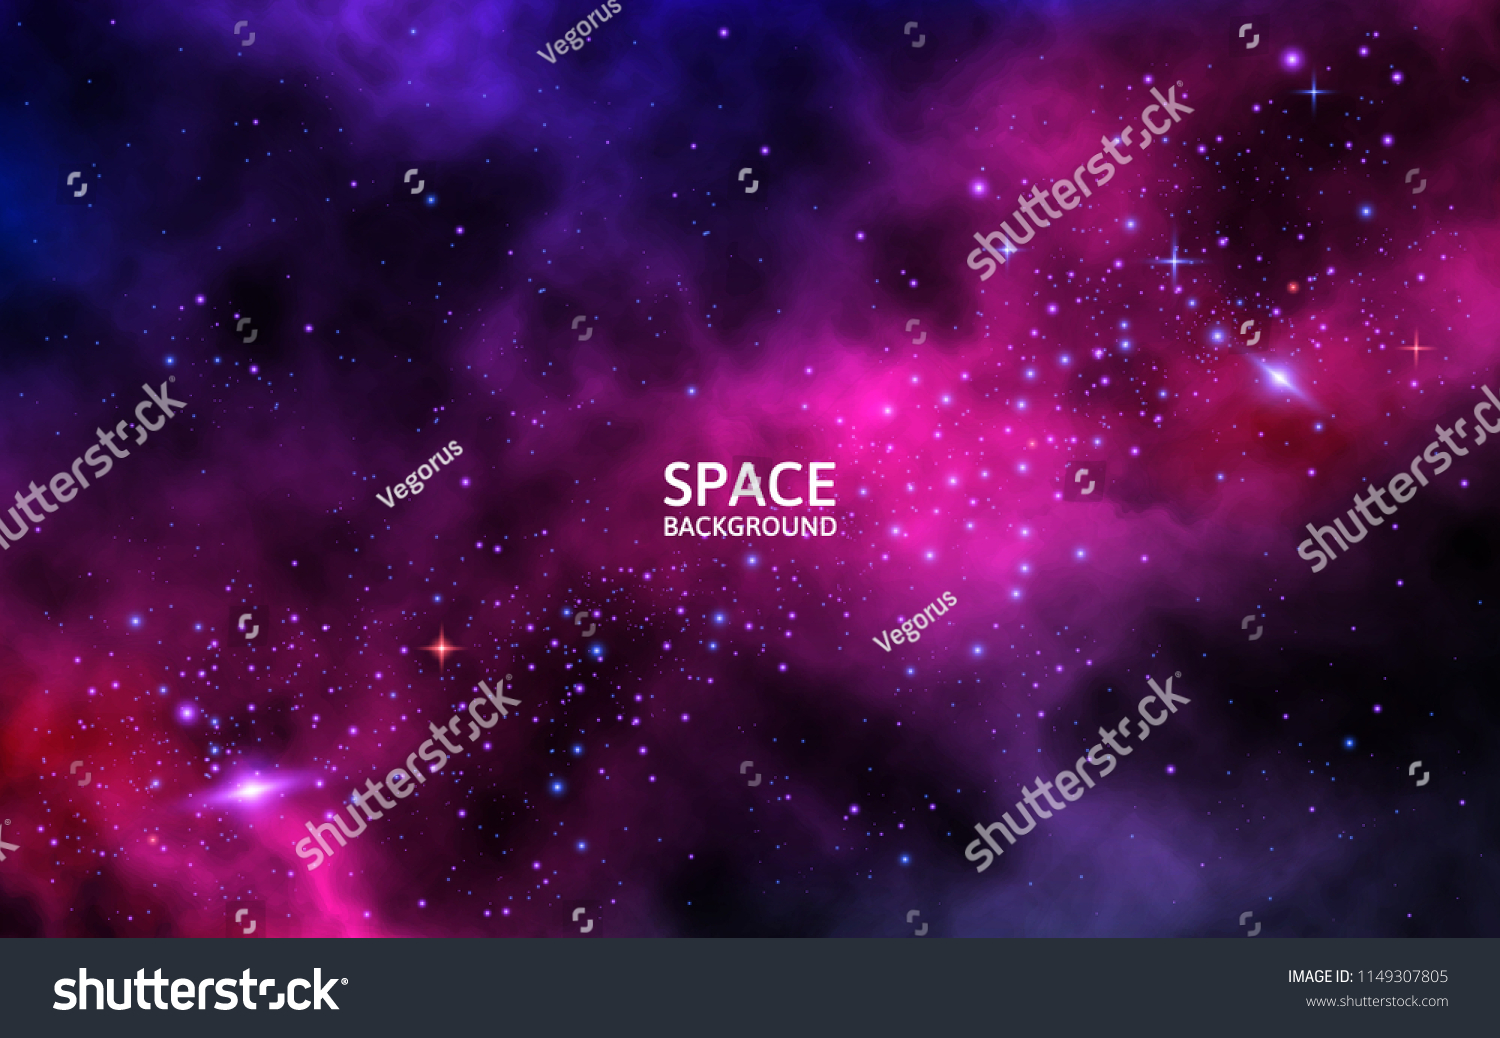 High Quality Colorful Galaxy Background